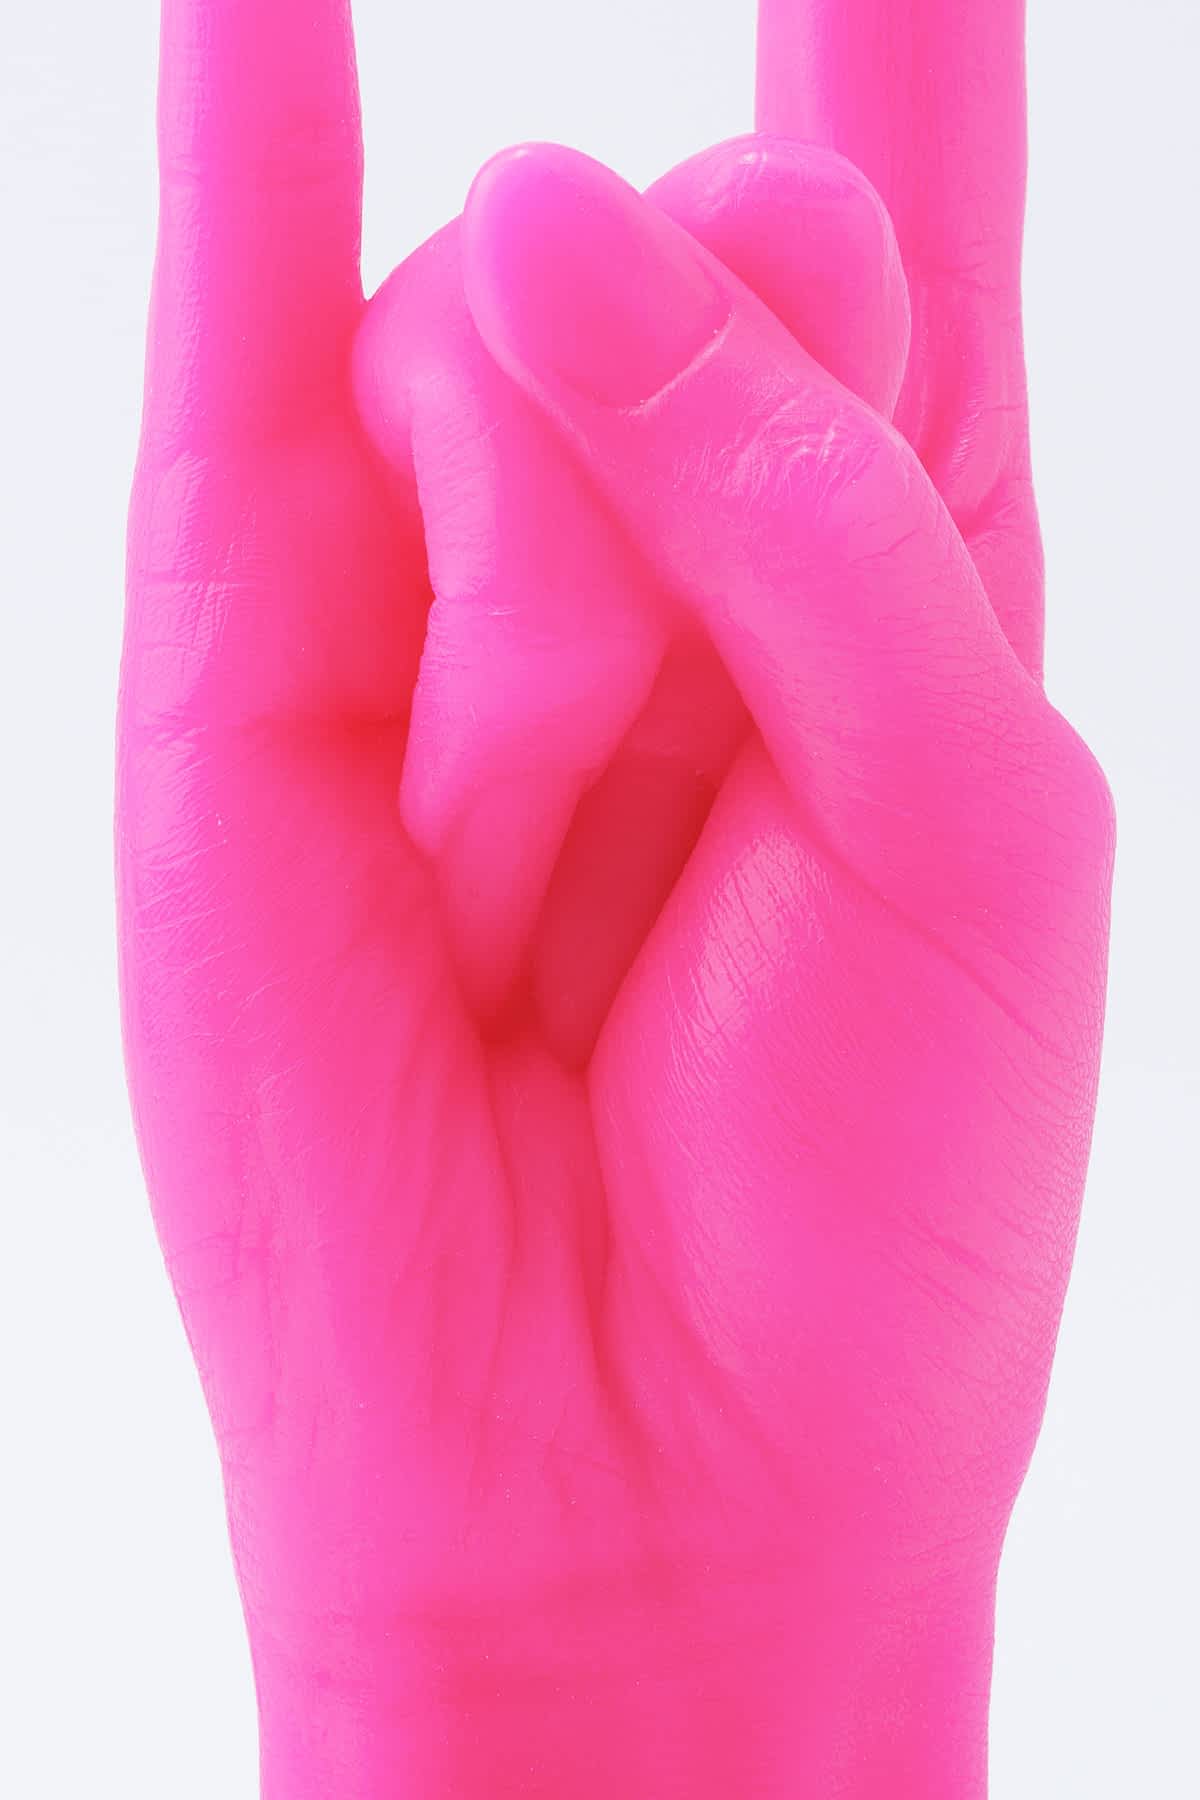 Super-YOU-Award-Neon-Pink-hand-candle-02-1800px